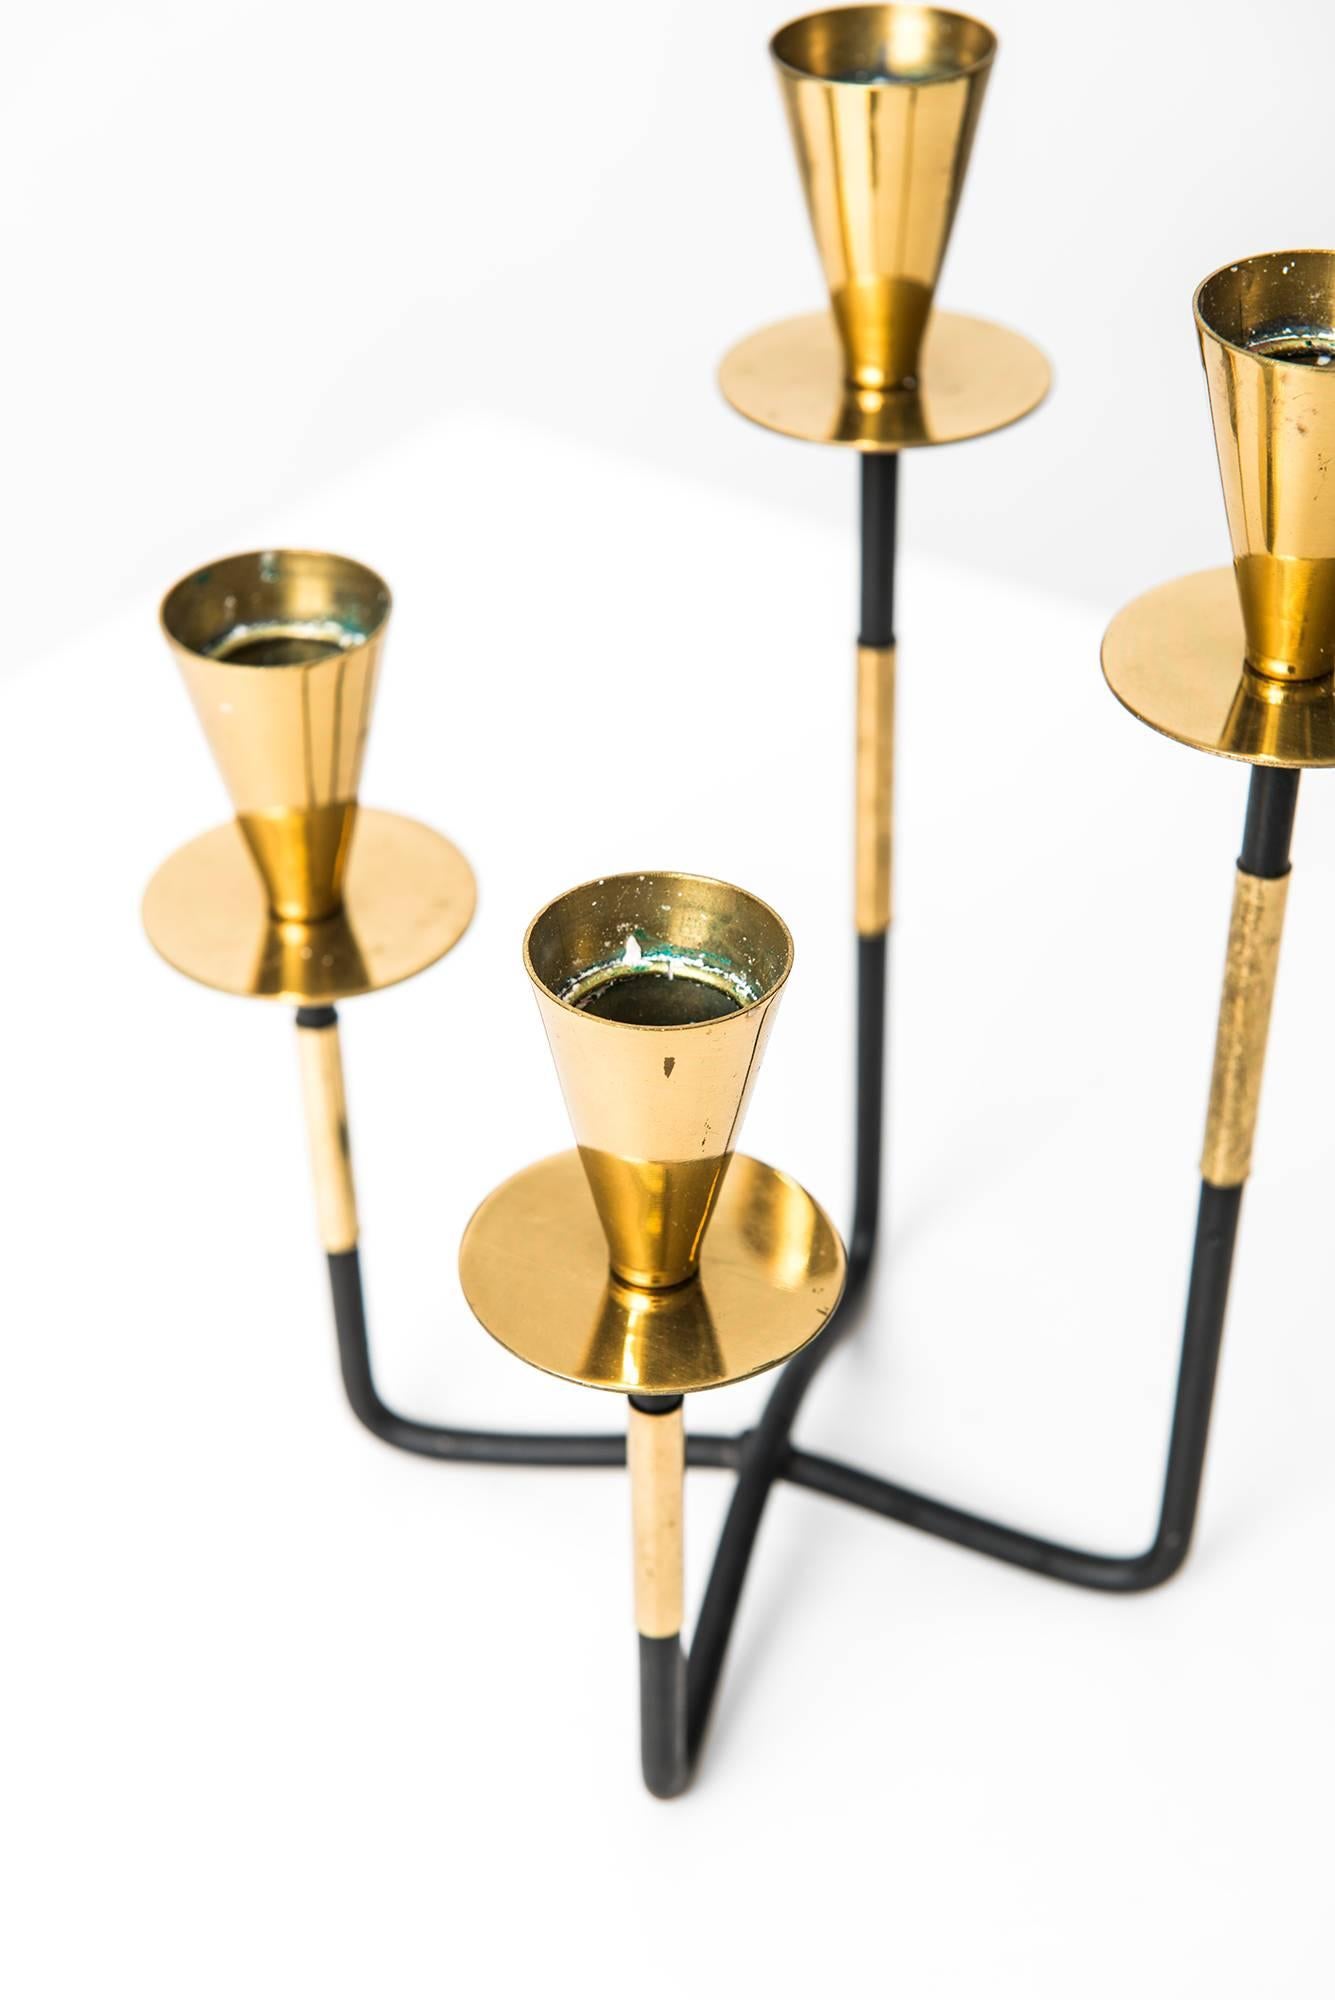 Candlestick in brass and black lacquered metal. Produced by Nils Johan in Sweden.